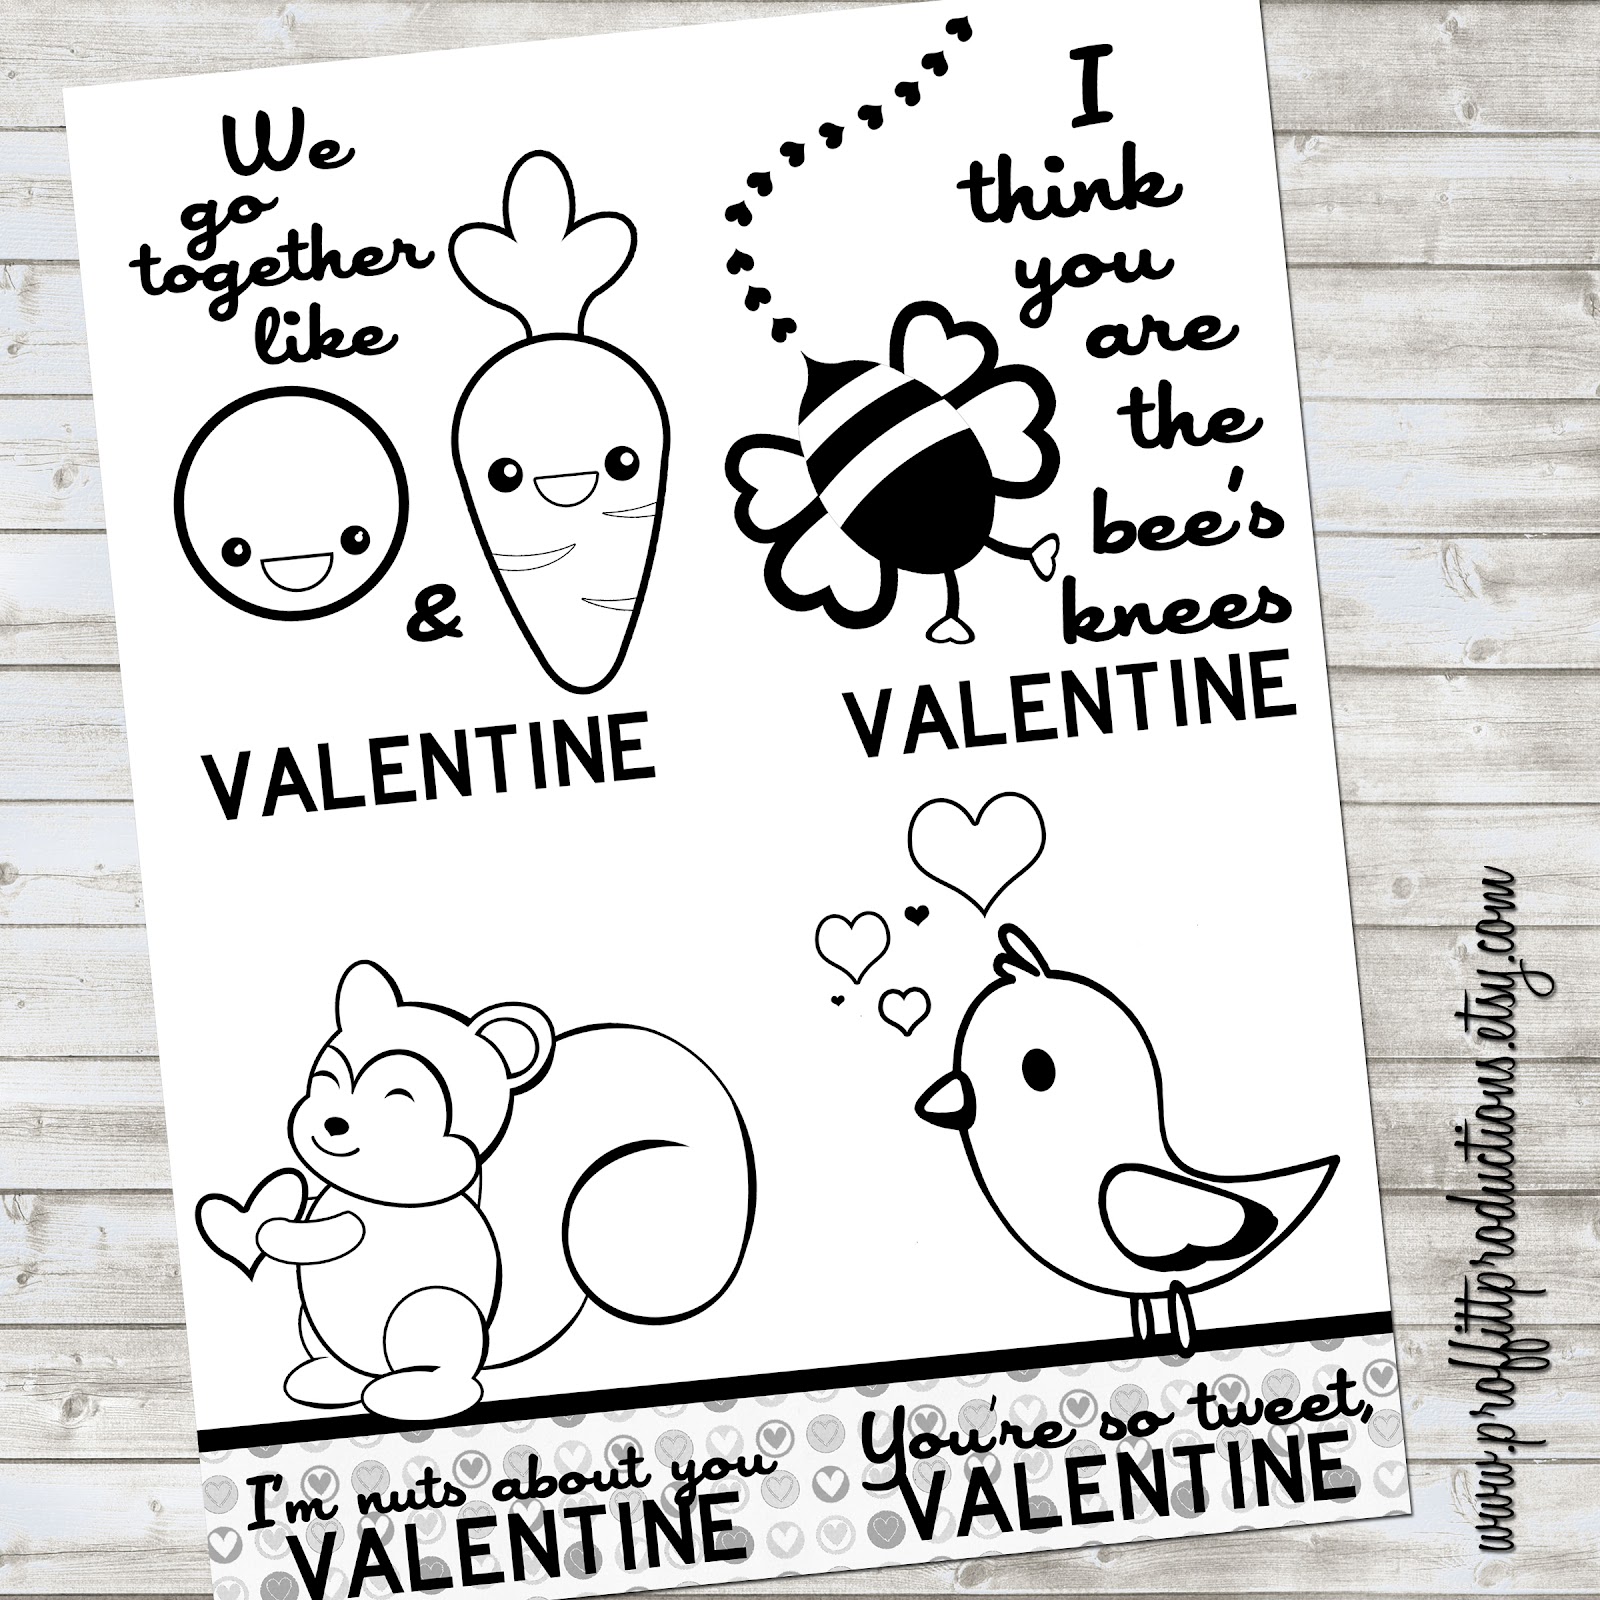 Funny Pictures Gallery: Valentines day sayings for kids, valentines day sayings1600 x 1600